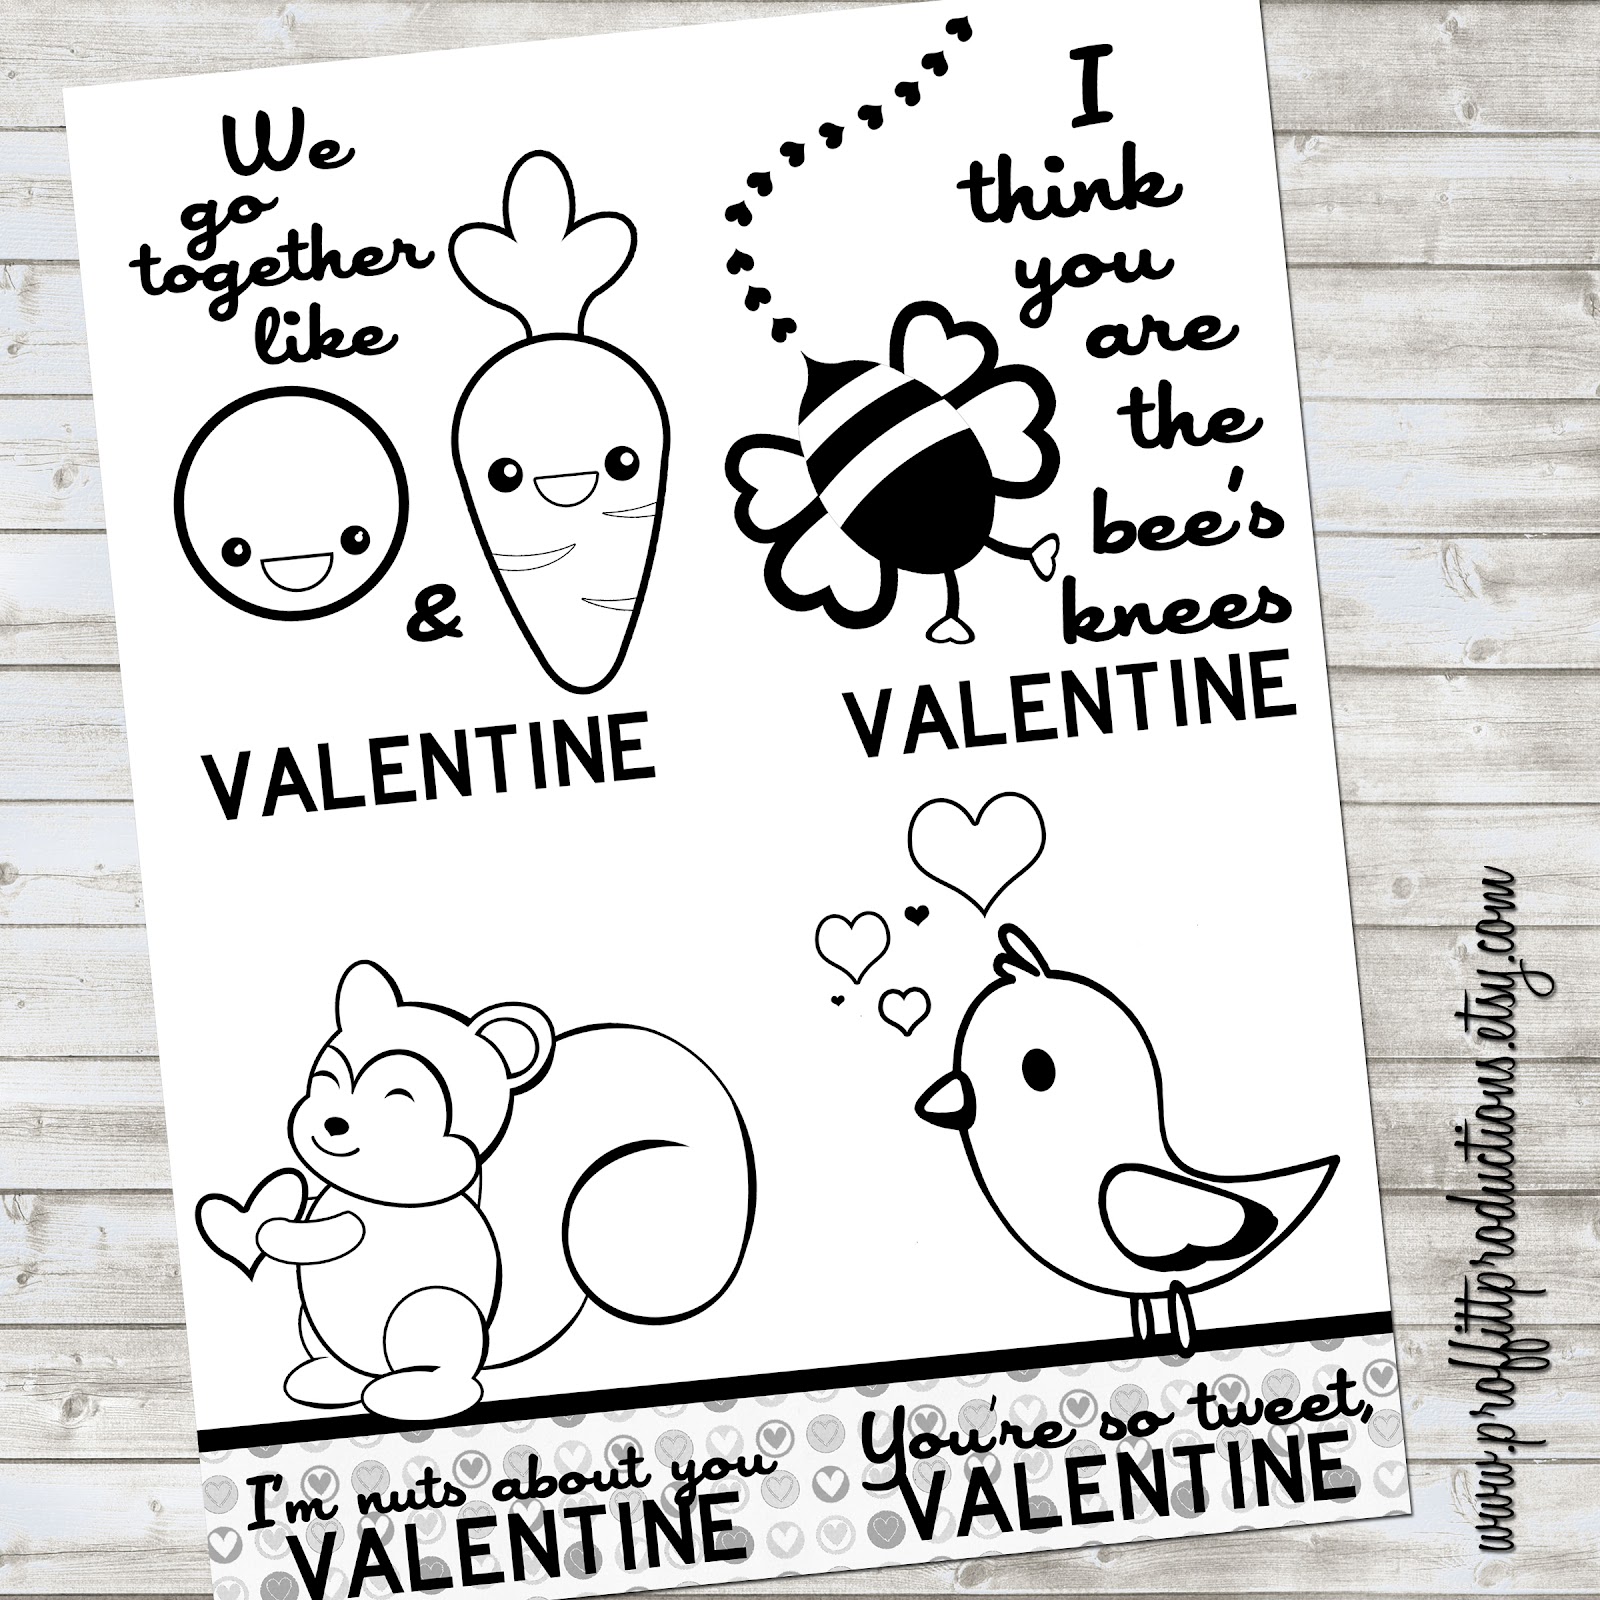 Funny Pictures Gallery: Valentines day sayings for kids, valentines day sayings1600 x 1600